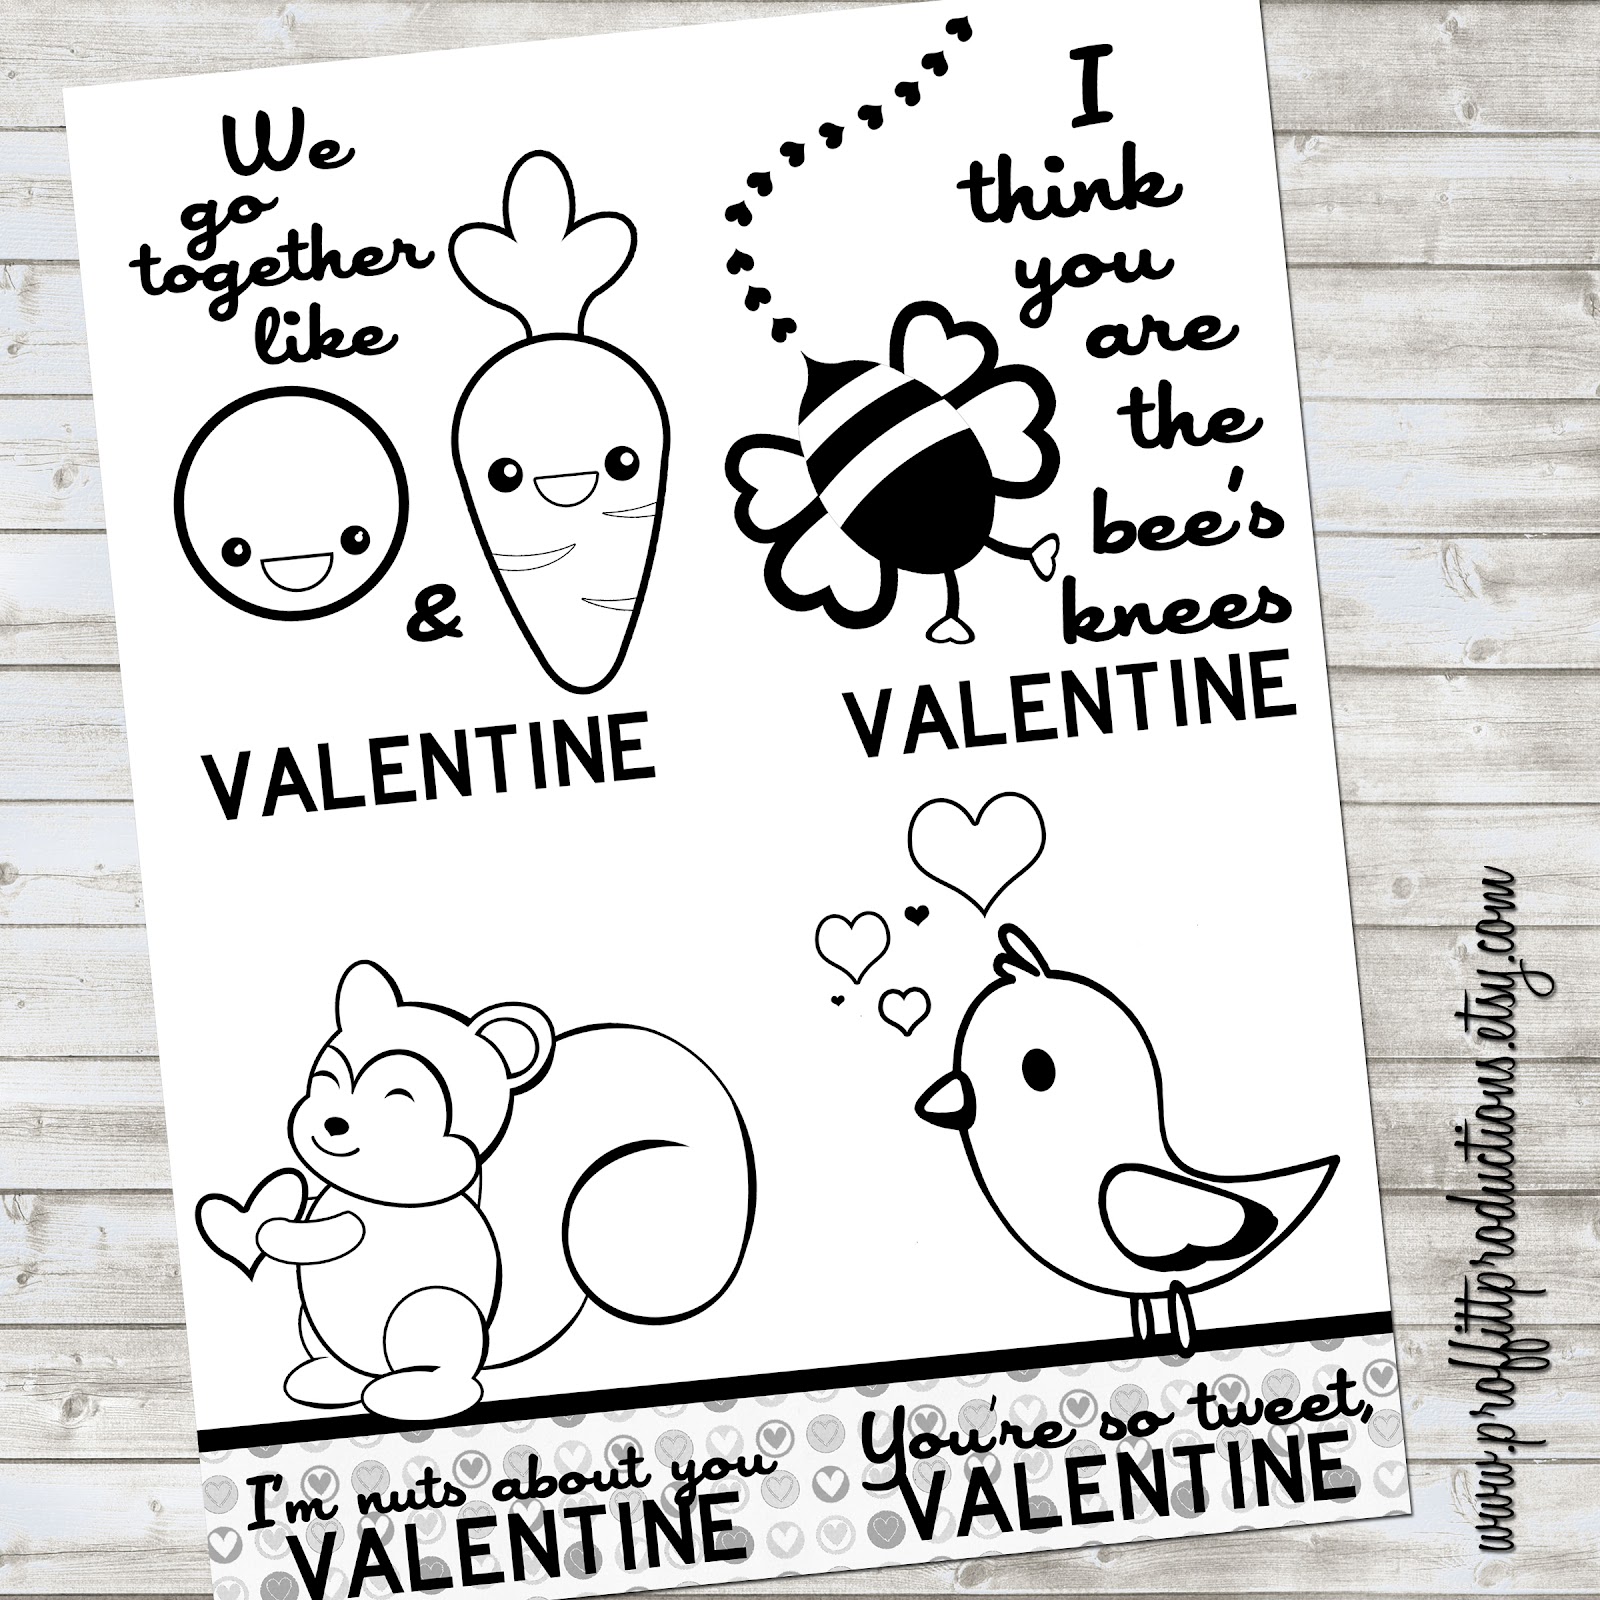 Funny Pictures Gallery: Valentines day sayings for kids, valentines day sayings1600 x 1600